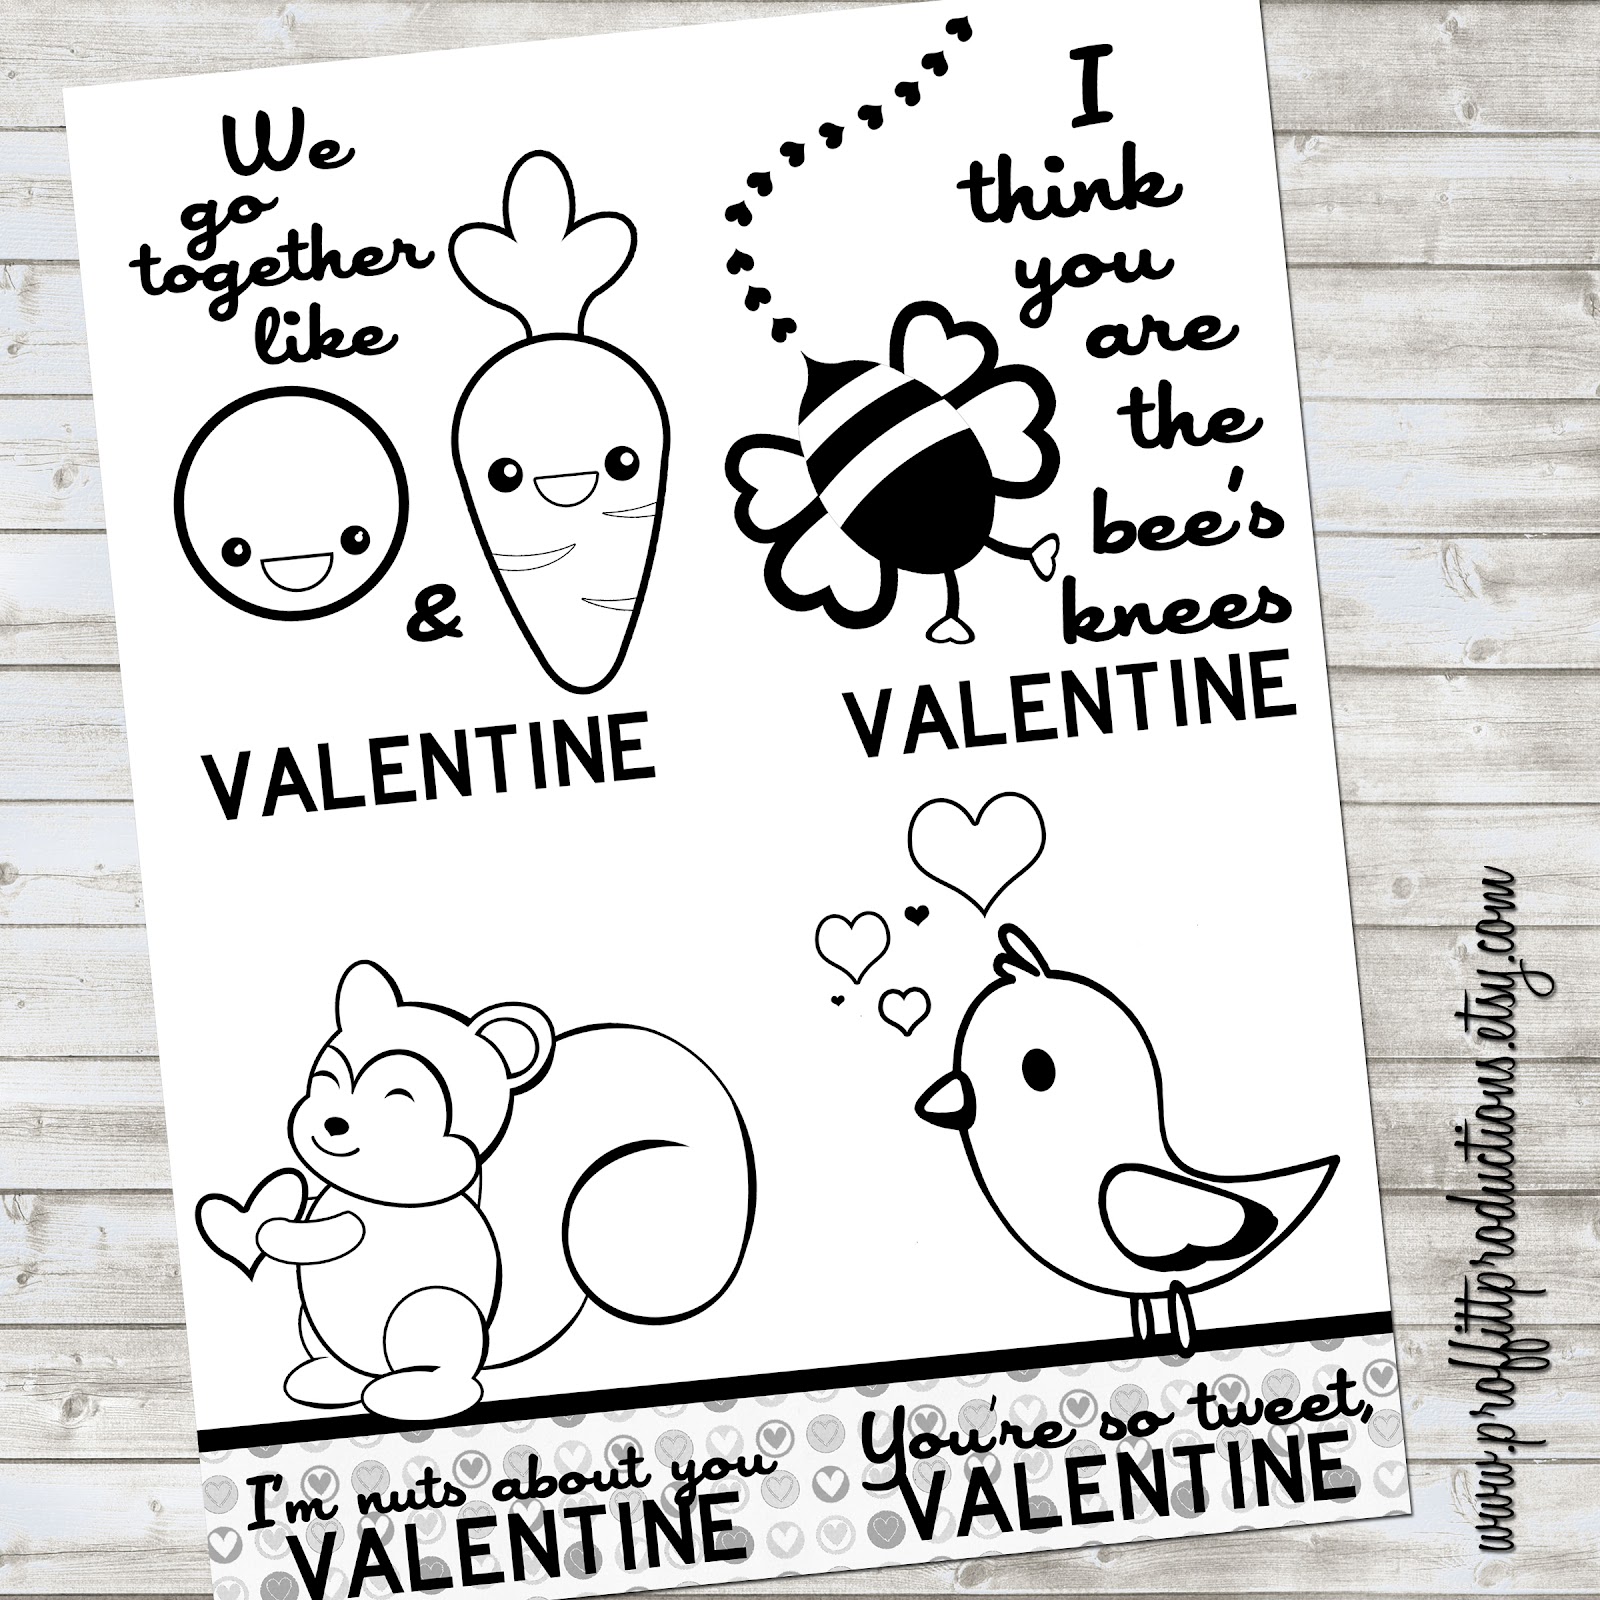 Funny Pictures Gallery: Valentines day sayings for kids, valentines day sayings1600 x 1600